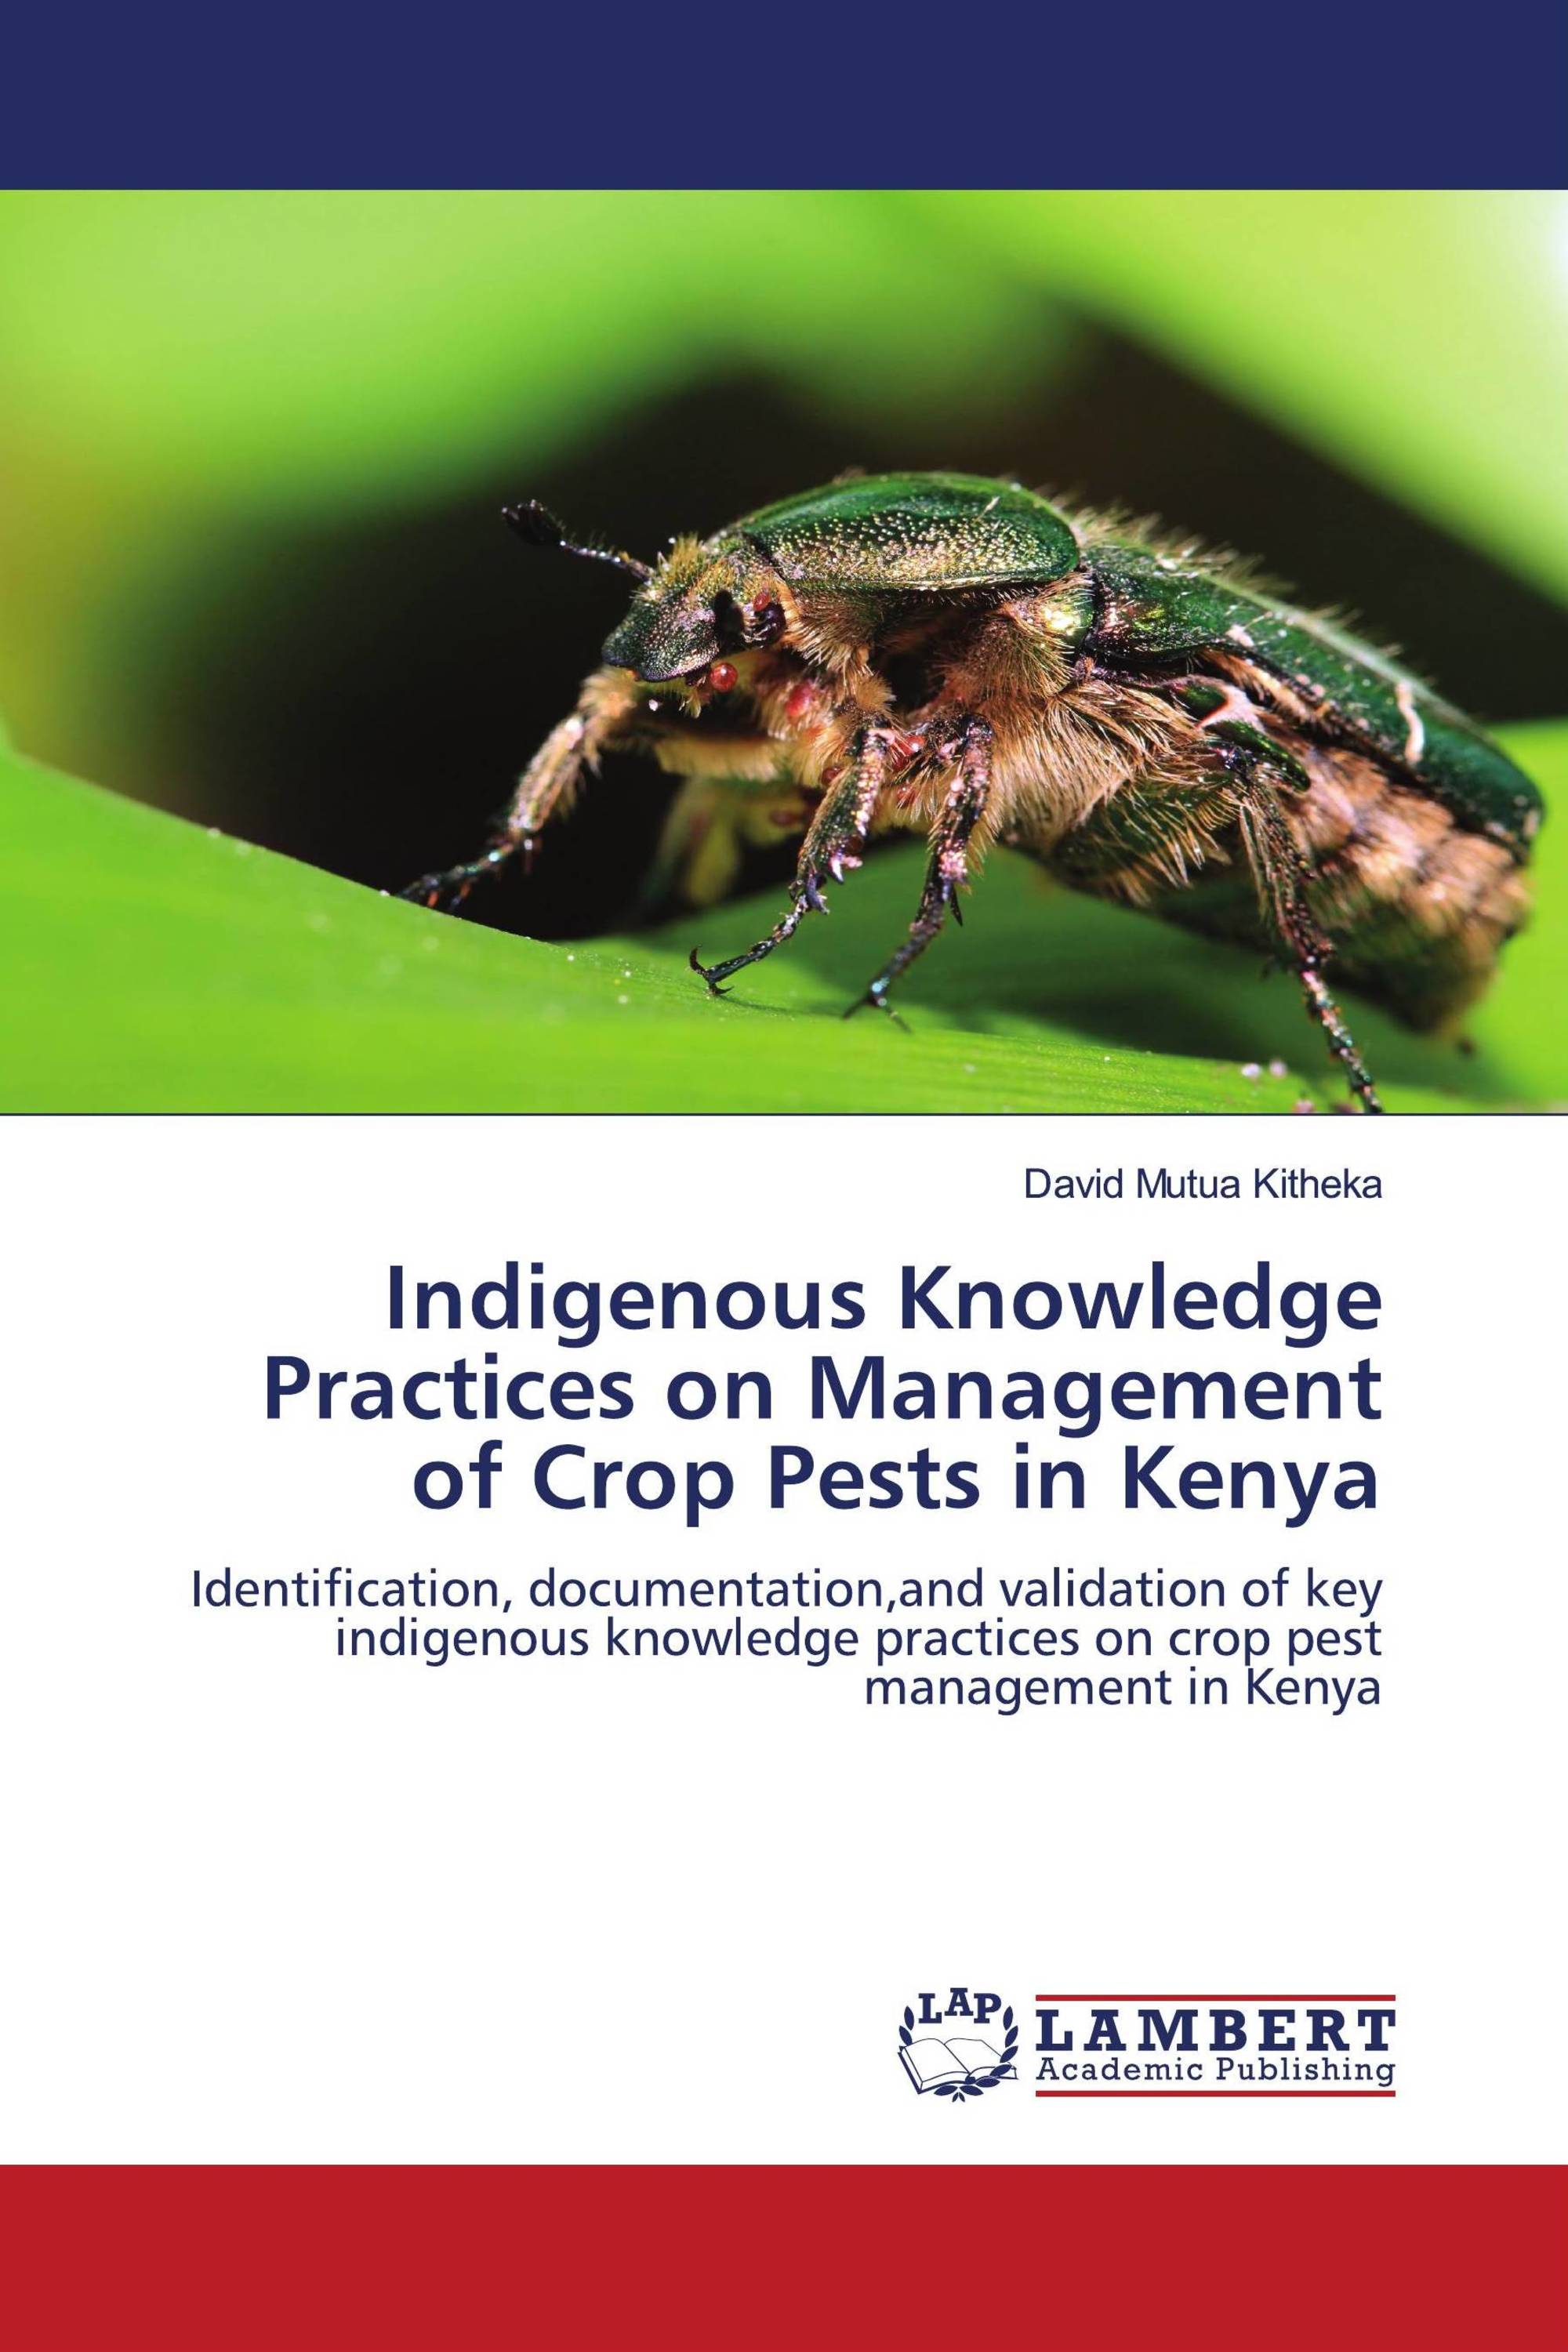 Indigenous Knowledge Practices on Management of Crop Pests in Kenya